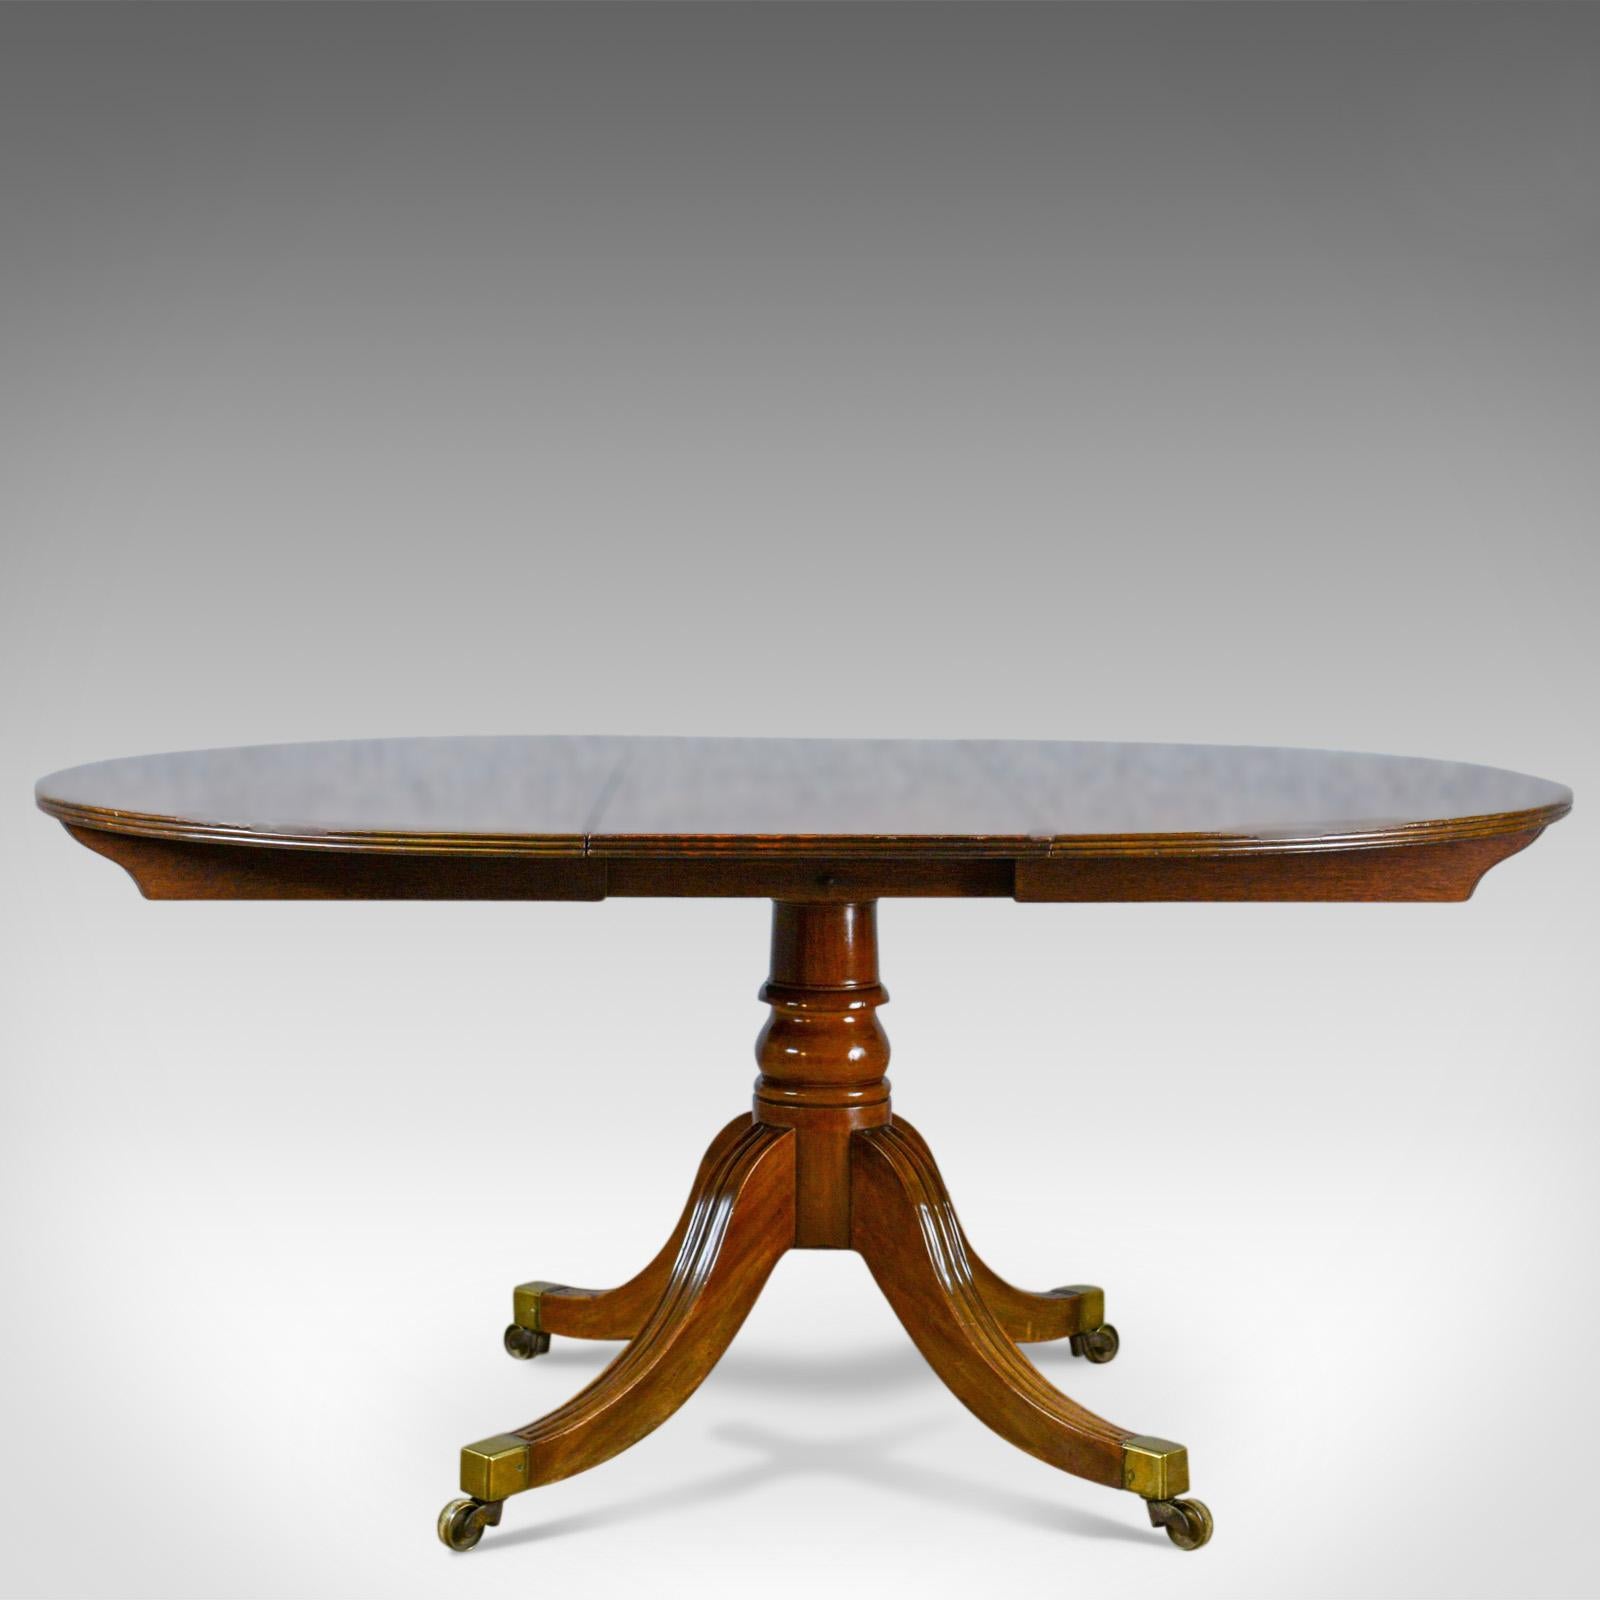 Our Stock # 18.5557

This is an antique dining table. An English, mahogany 4-6 seat extending table, dating to the Regency period and later, circa 1820.

Quality dining furniture
Displays a desirable aged patina
Select mahogany shows fine